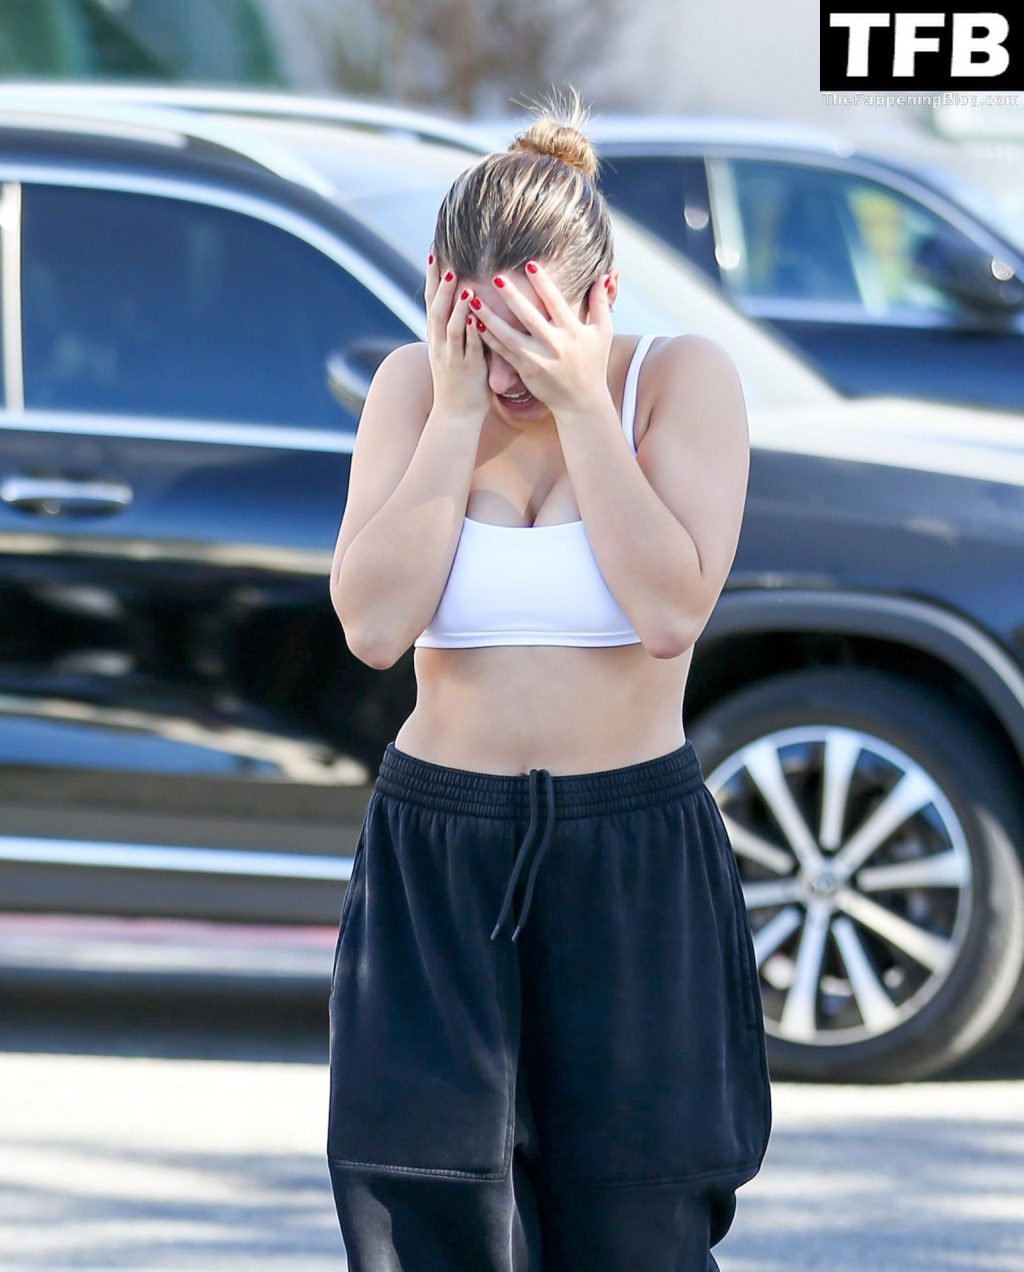 Addison Rae Sexy Boobs 2 thefappeningblog.com  1024x1272 - Addison Rae Flaunts Her Sexy Tits in a Sports Bra in WeHo (21 Photos)